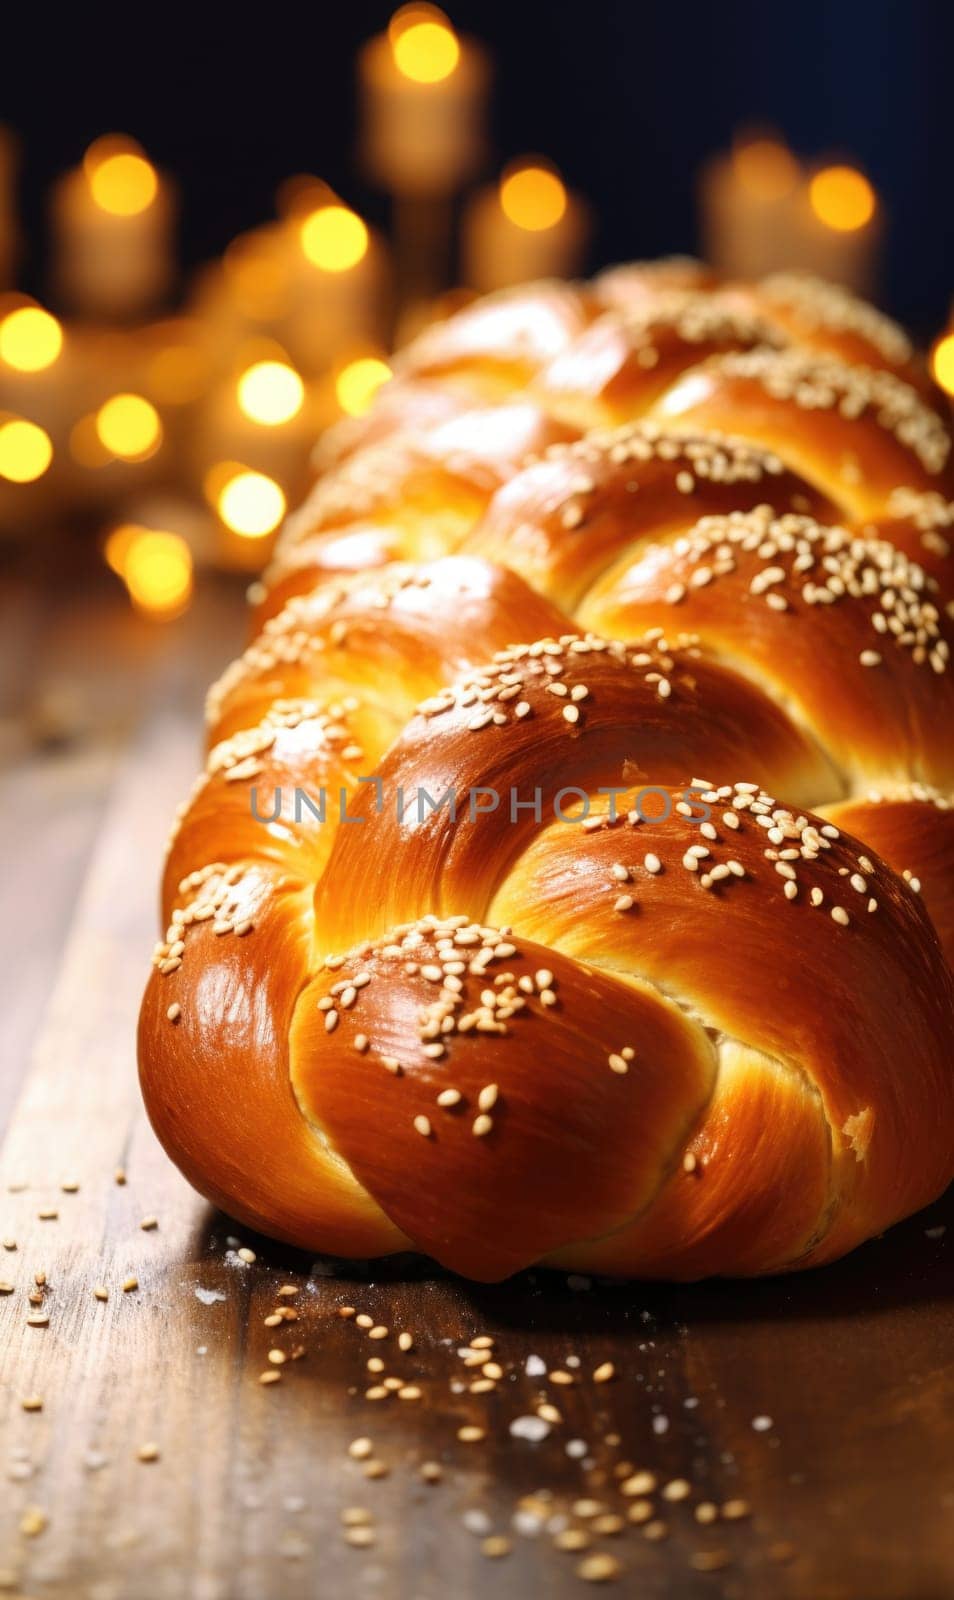 A braided bread with sesame seeds on a wooden table with candles, AI by starush